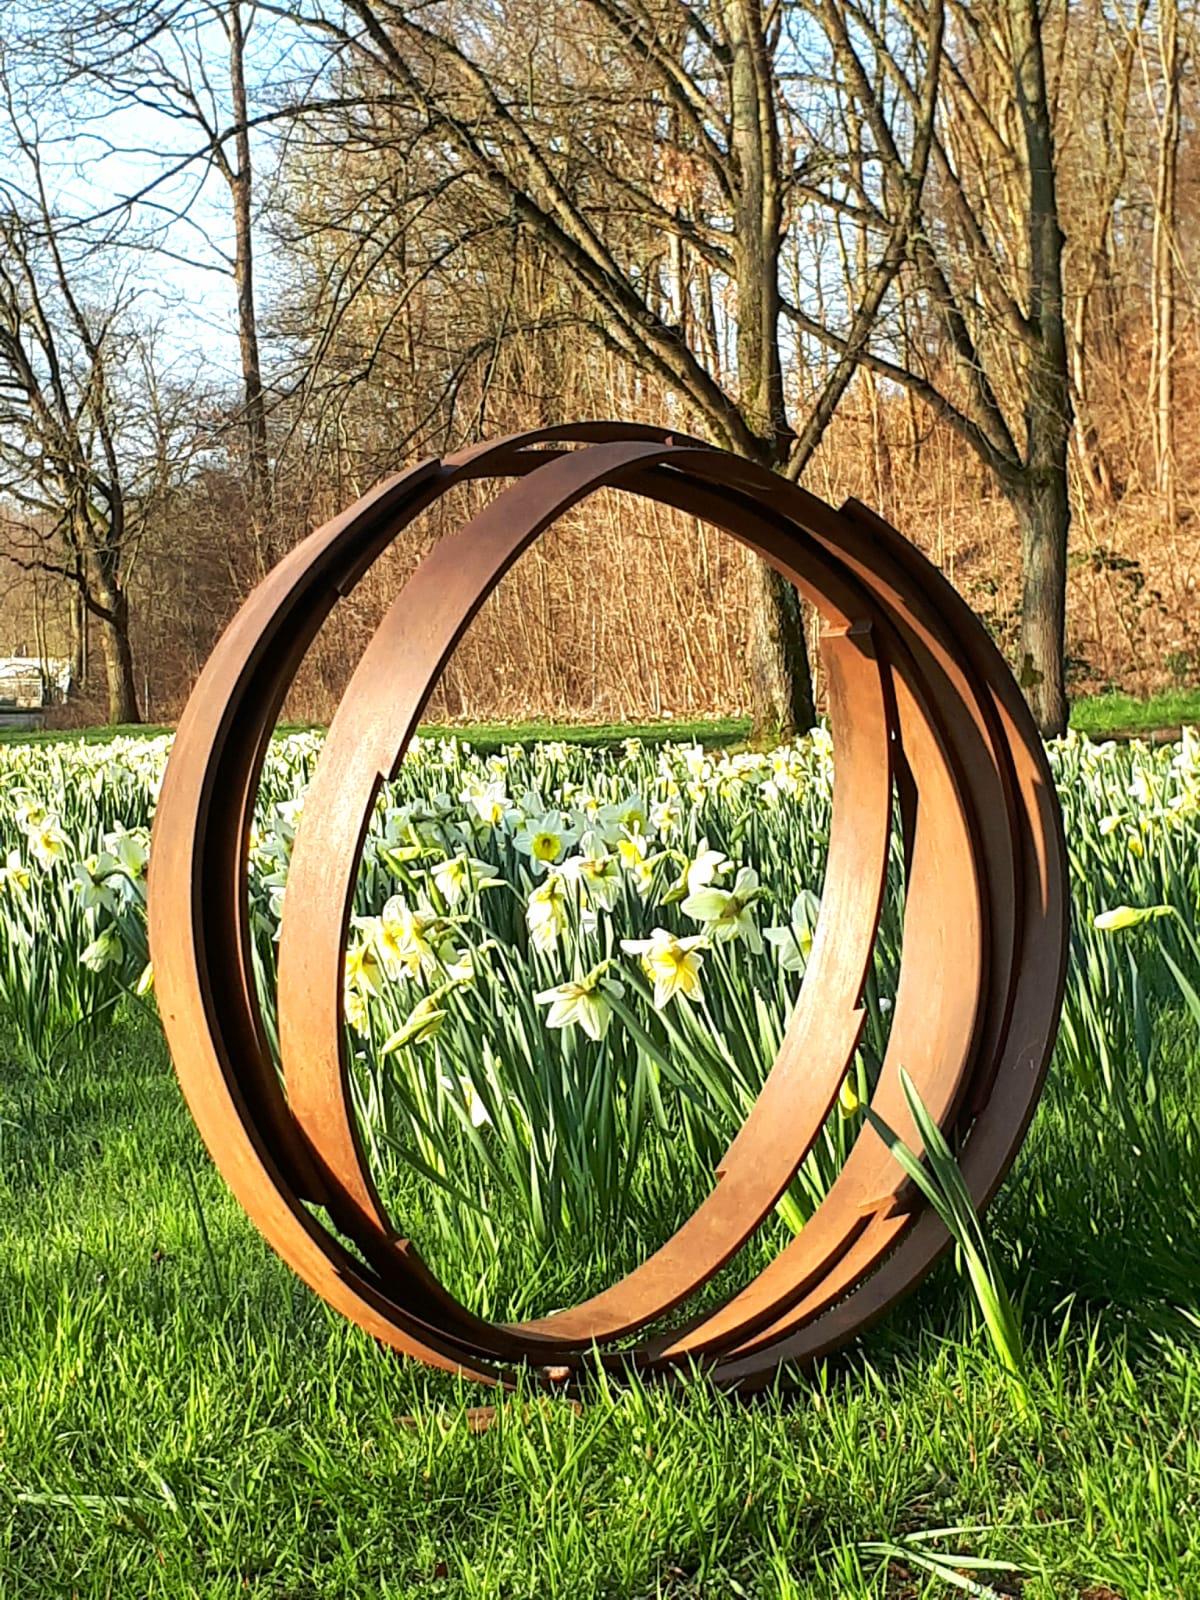 Artist: Kuno Vollet

Title: Orbit

Contemporary rusted steel sculpture for inside or garden outdoor spaces.

Beautiful circle - sign for infinity. Stunning large artwork. Possible to put on a pedestal or directly on to the ground.

About the